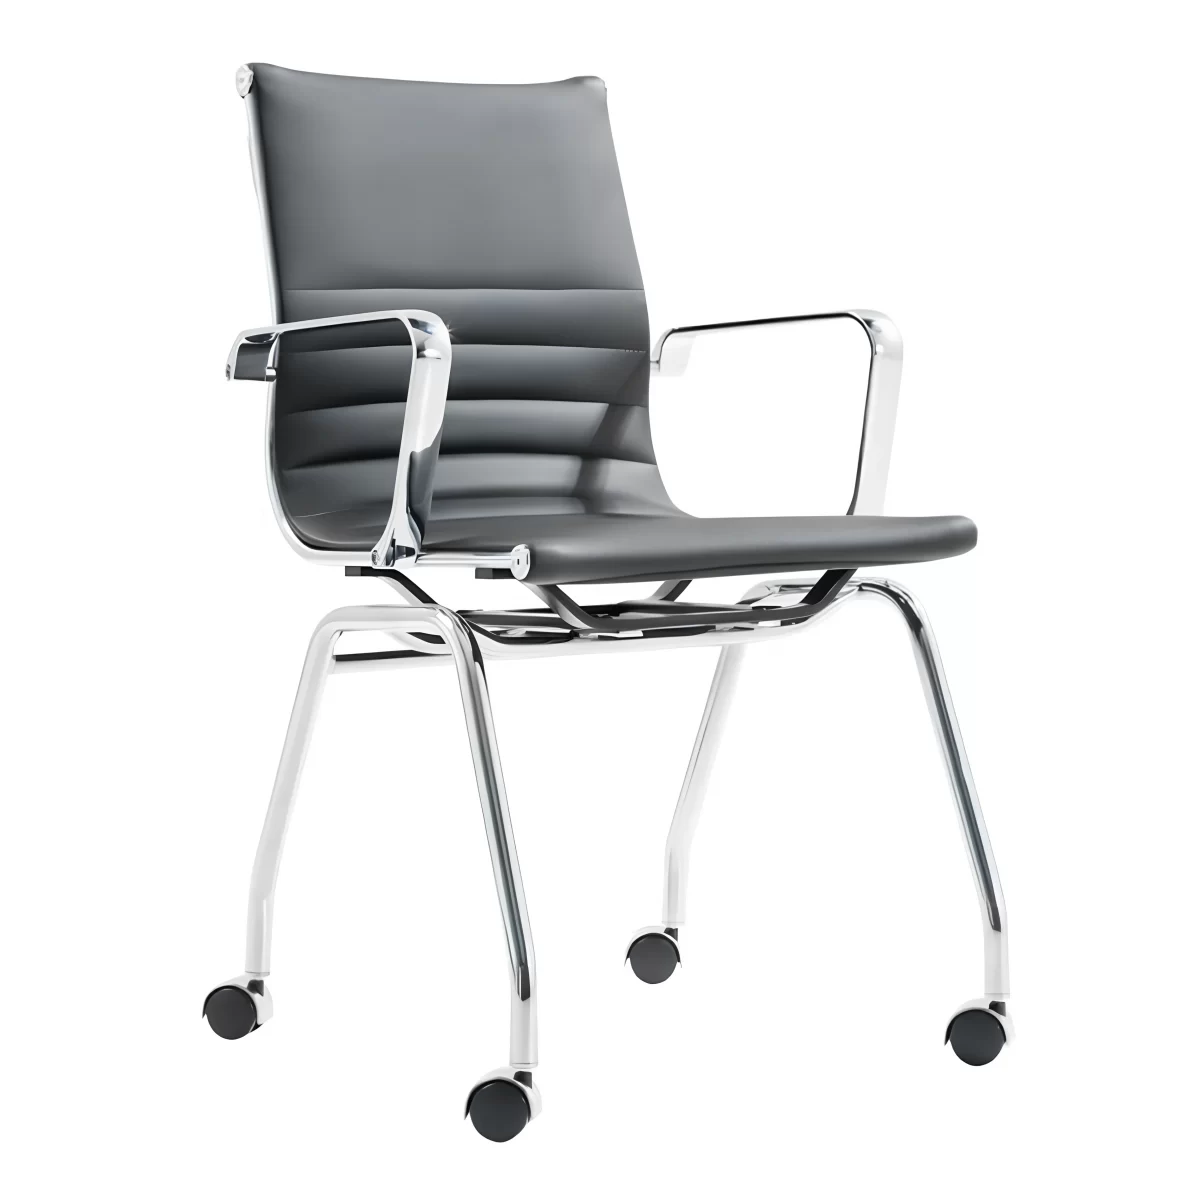 Eva Office Meeting Chair with Wheels scaled